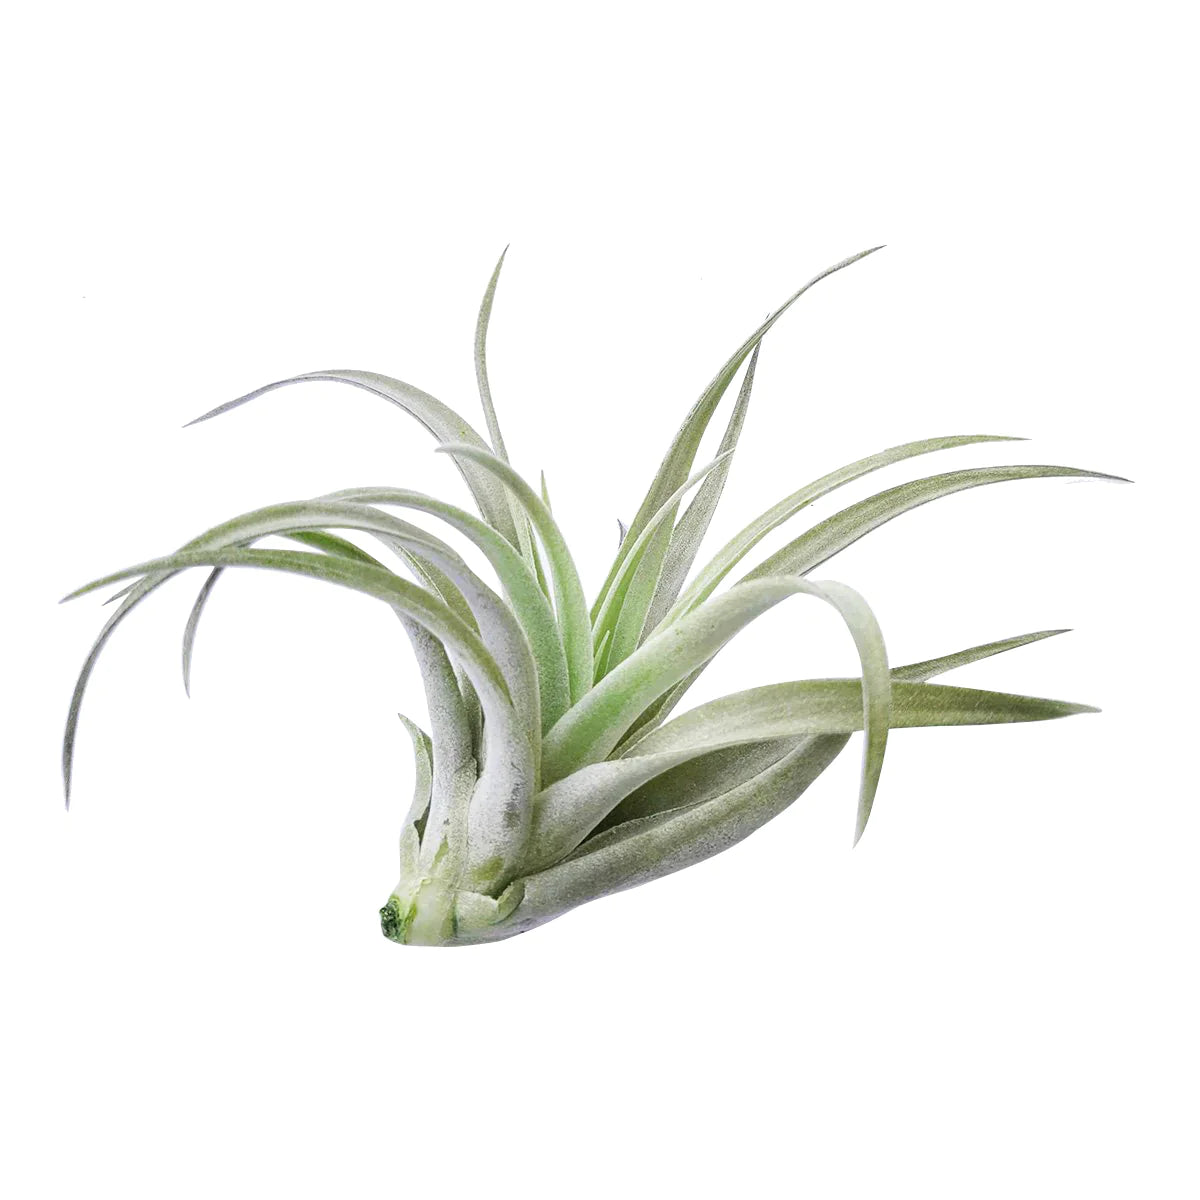 Air Plant 'Harrisii - Green' 4-5" - Urban Sprouts